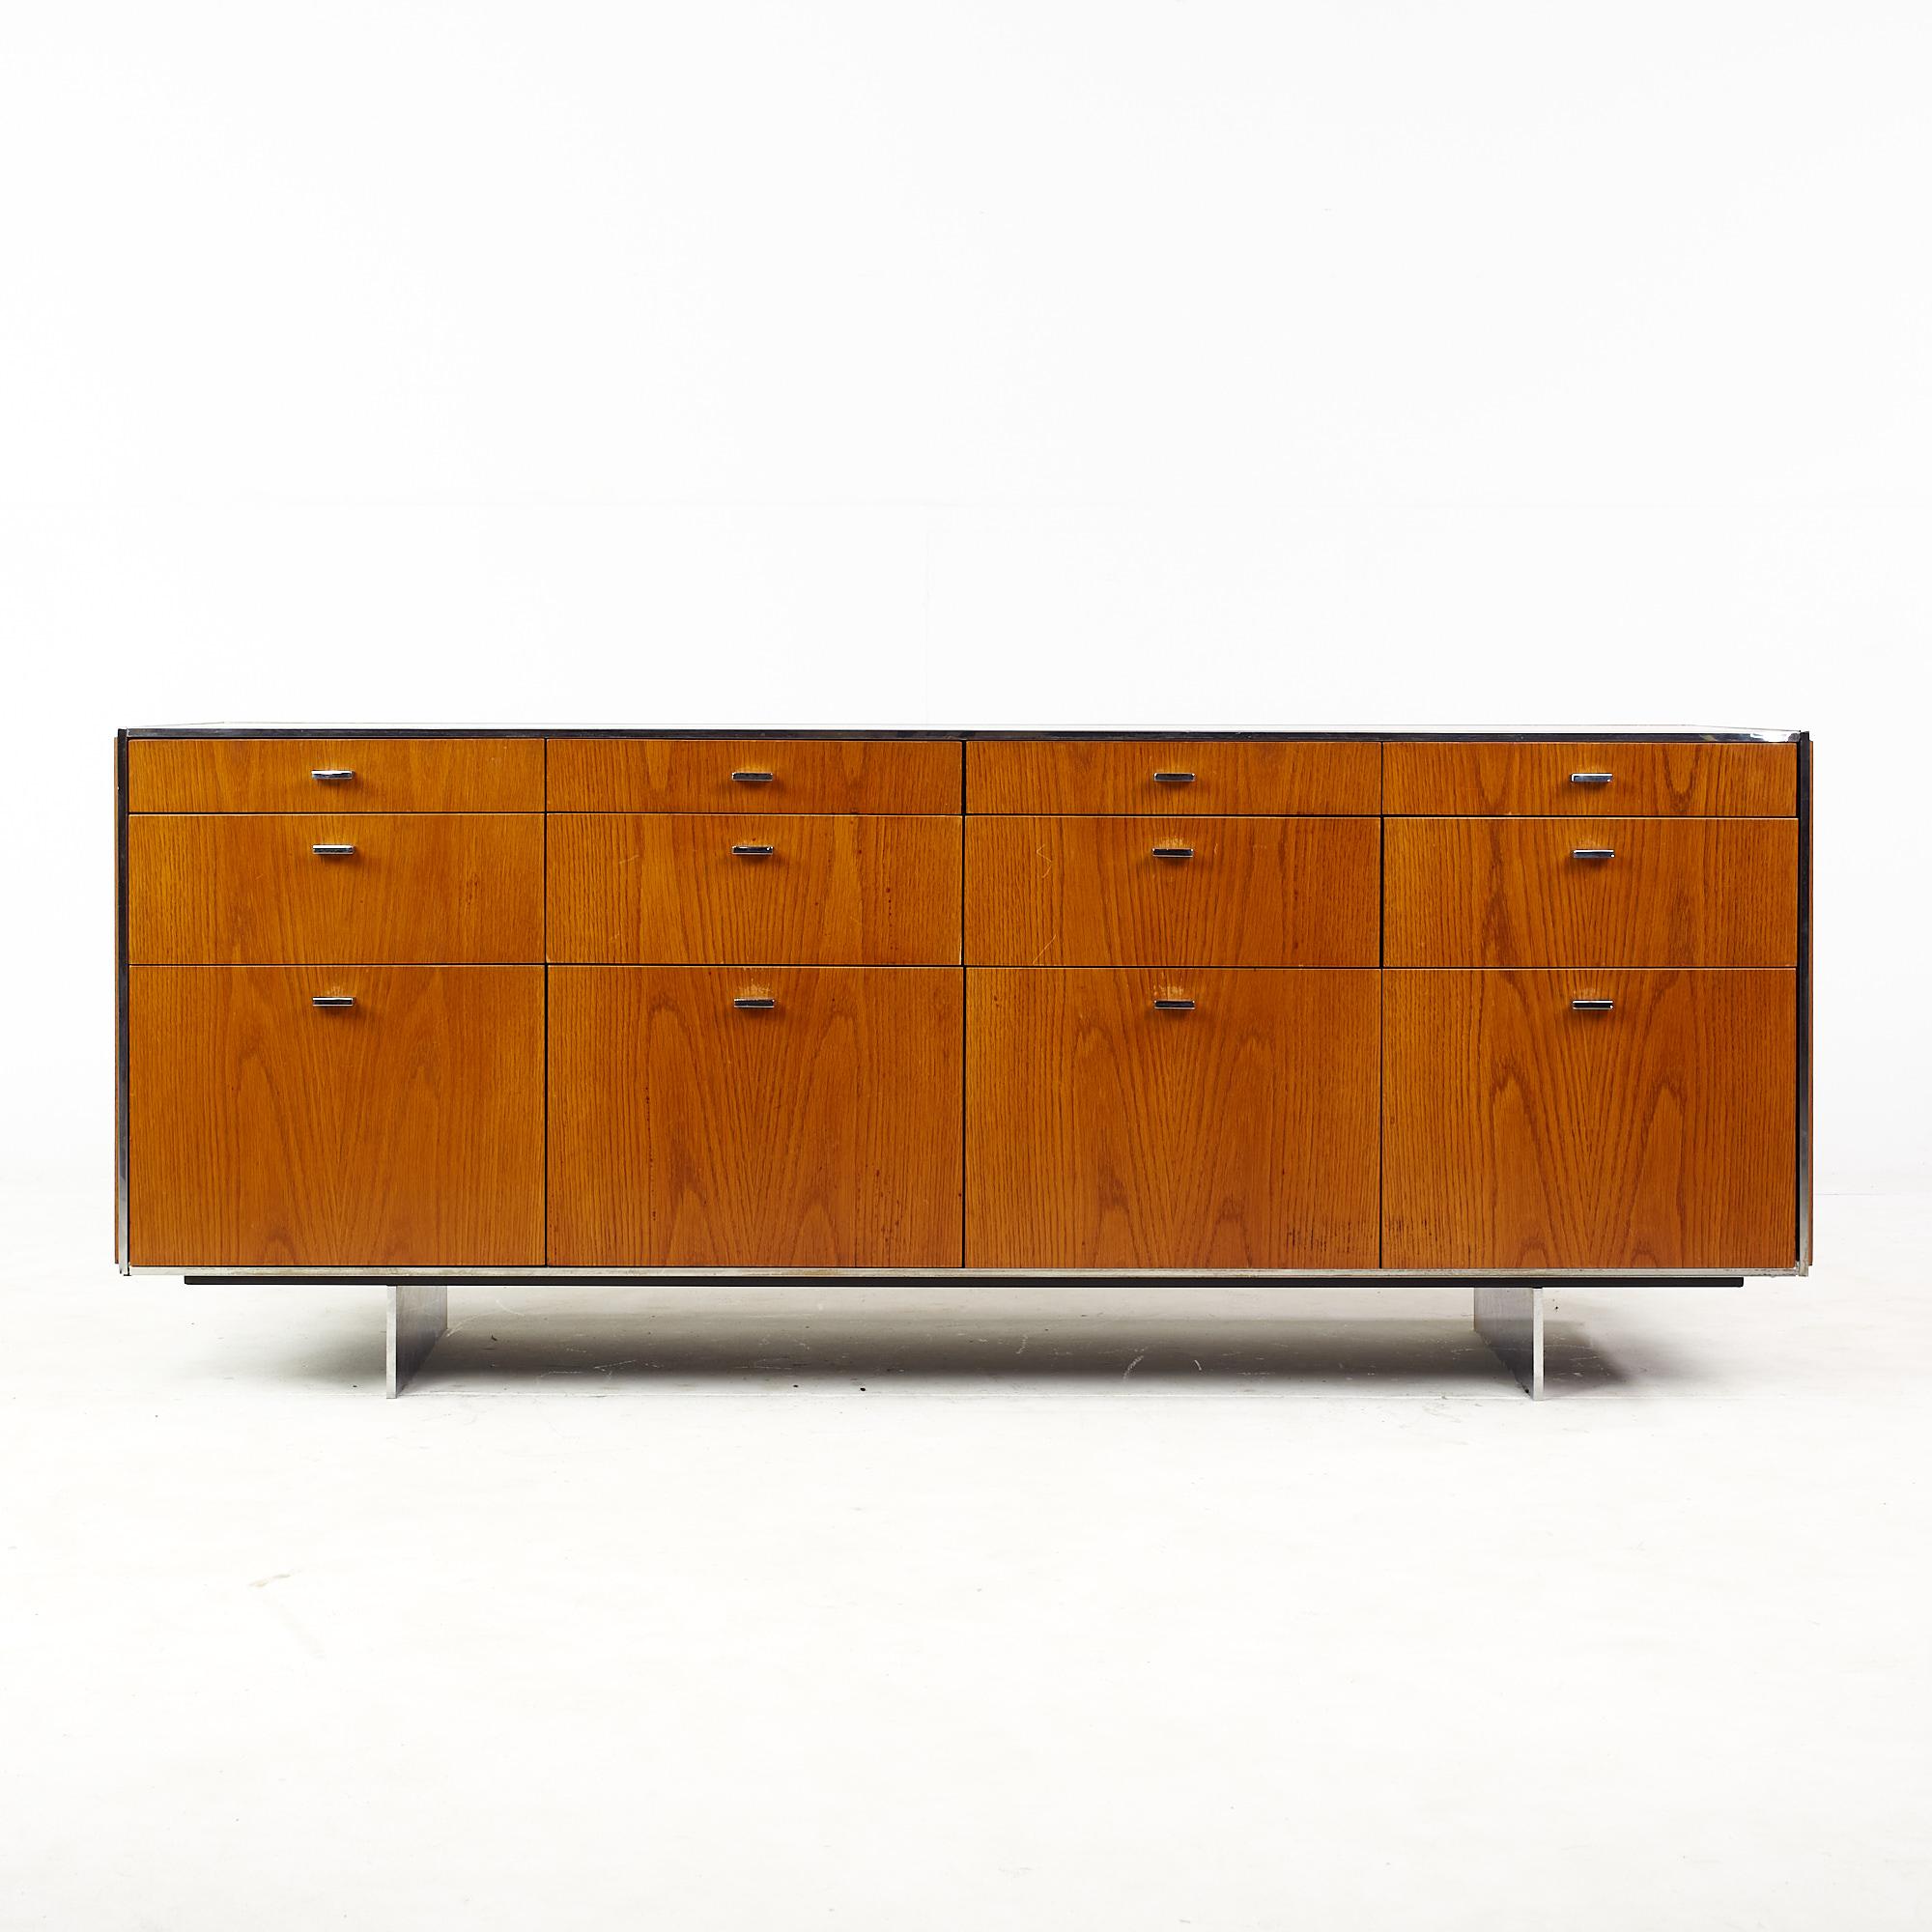 Florence Knoll style mid century walnut and chrome credenza

This credenza measures: 65 wide x 21.5 deep x 26.5 inches high

All pieces of furniture can be had in what we call restored vintage condition. That means the piece is restored upon